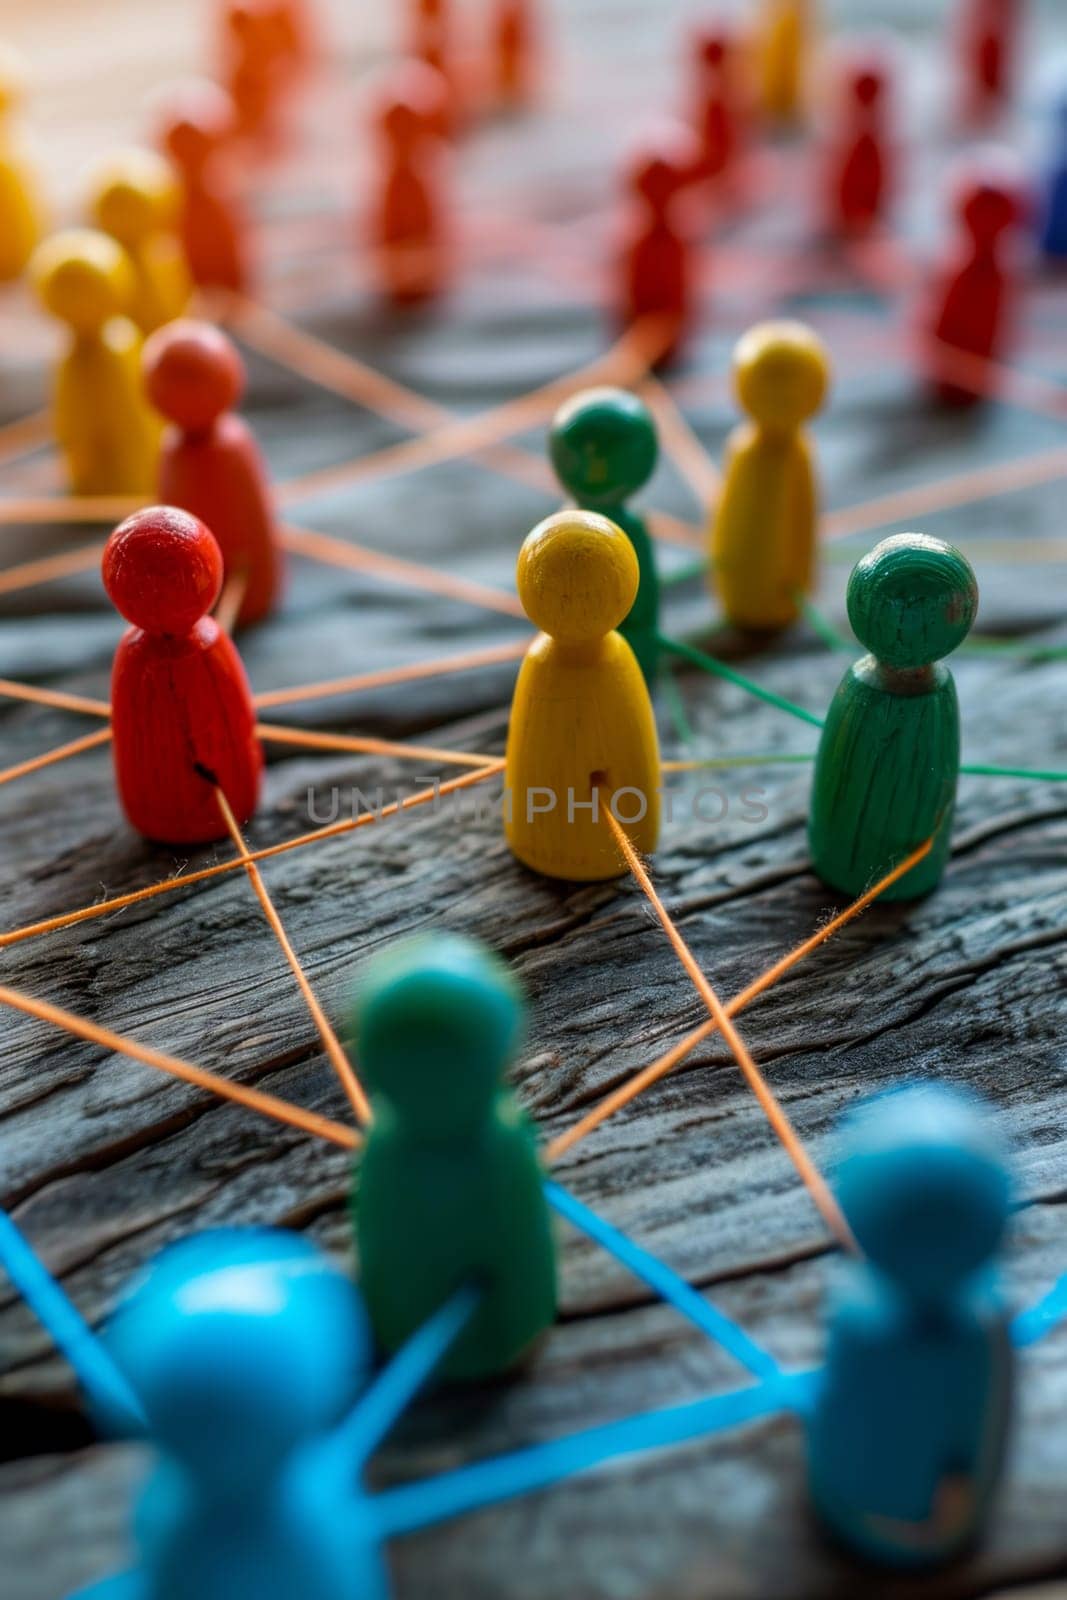 the social network community team. The concept of connections between people.